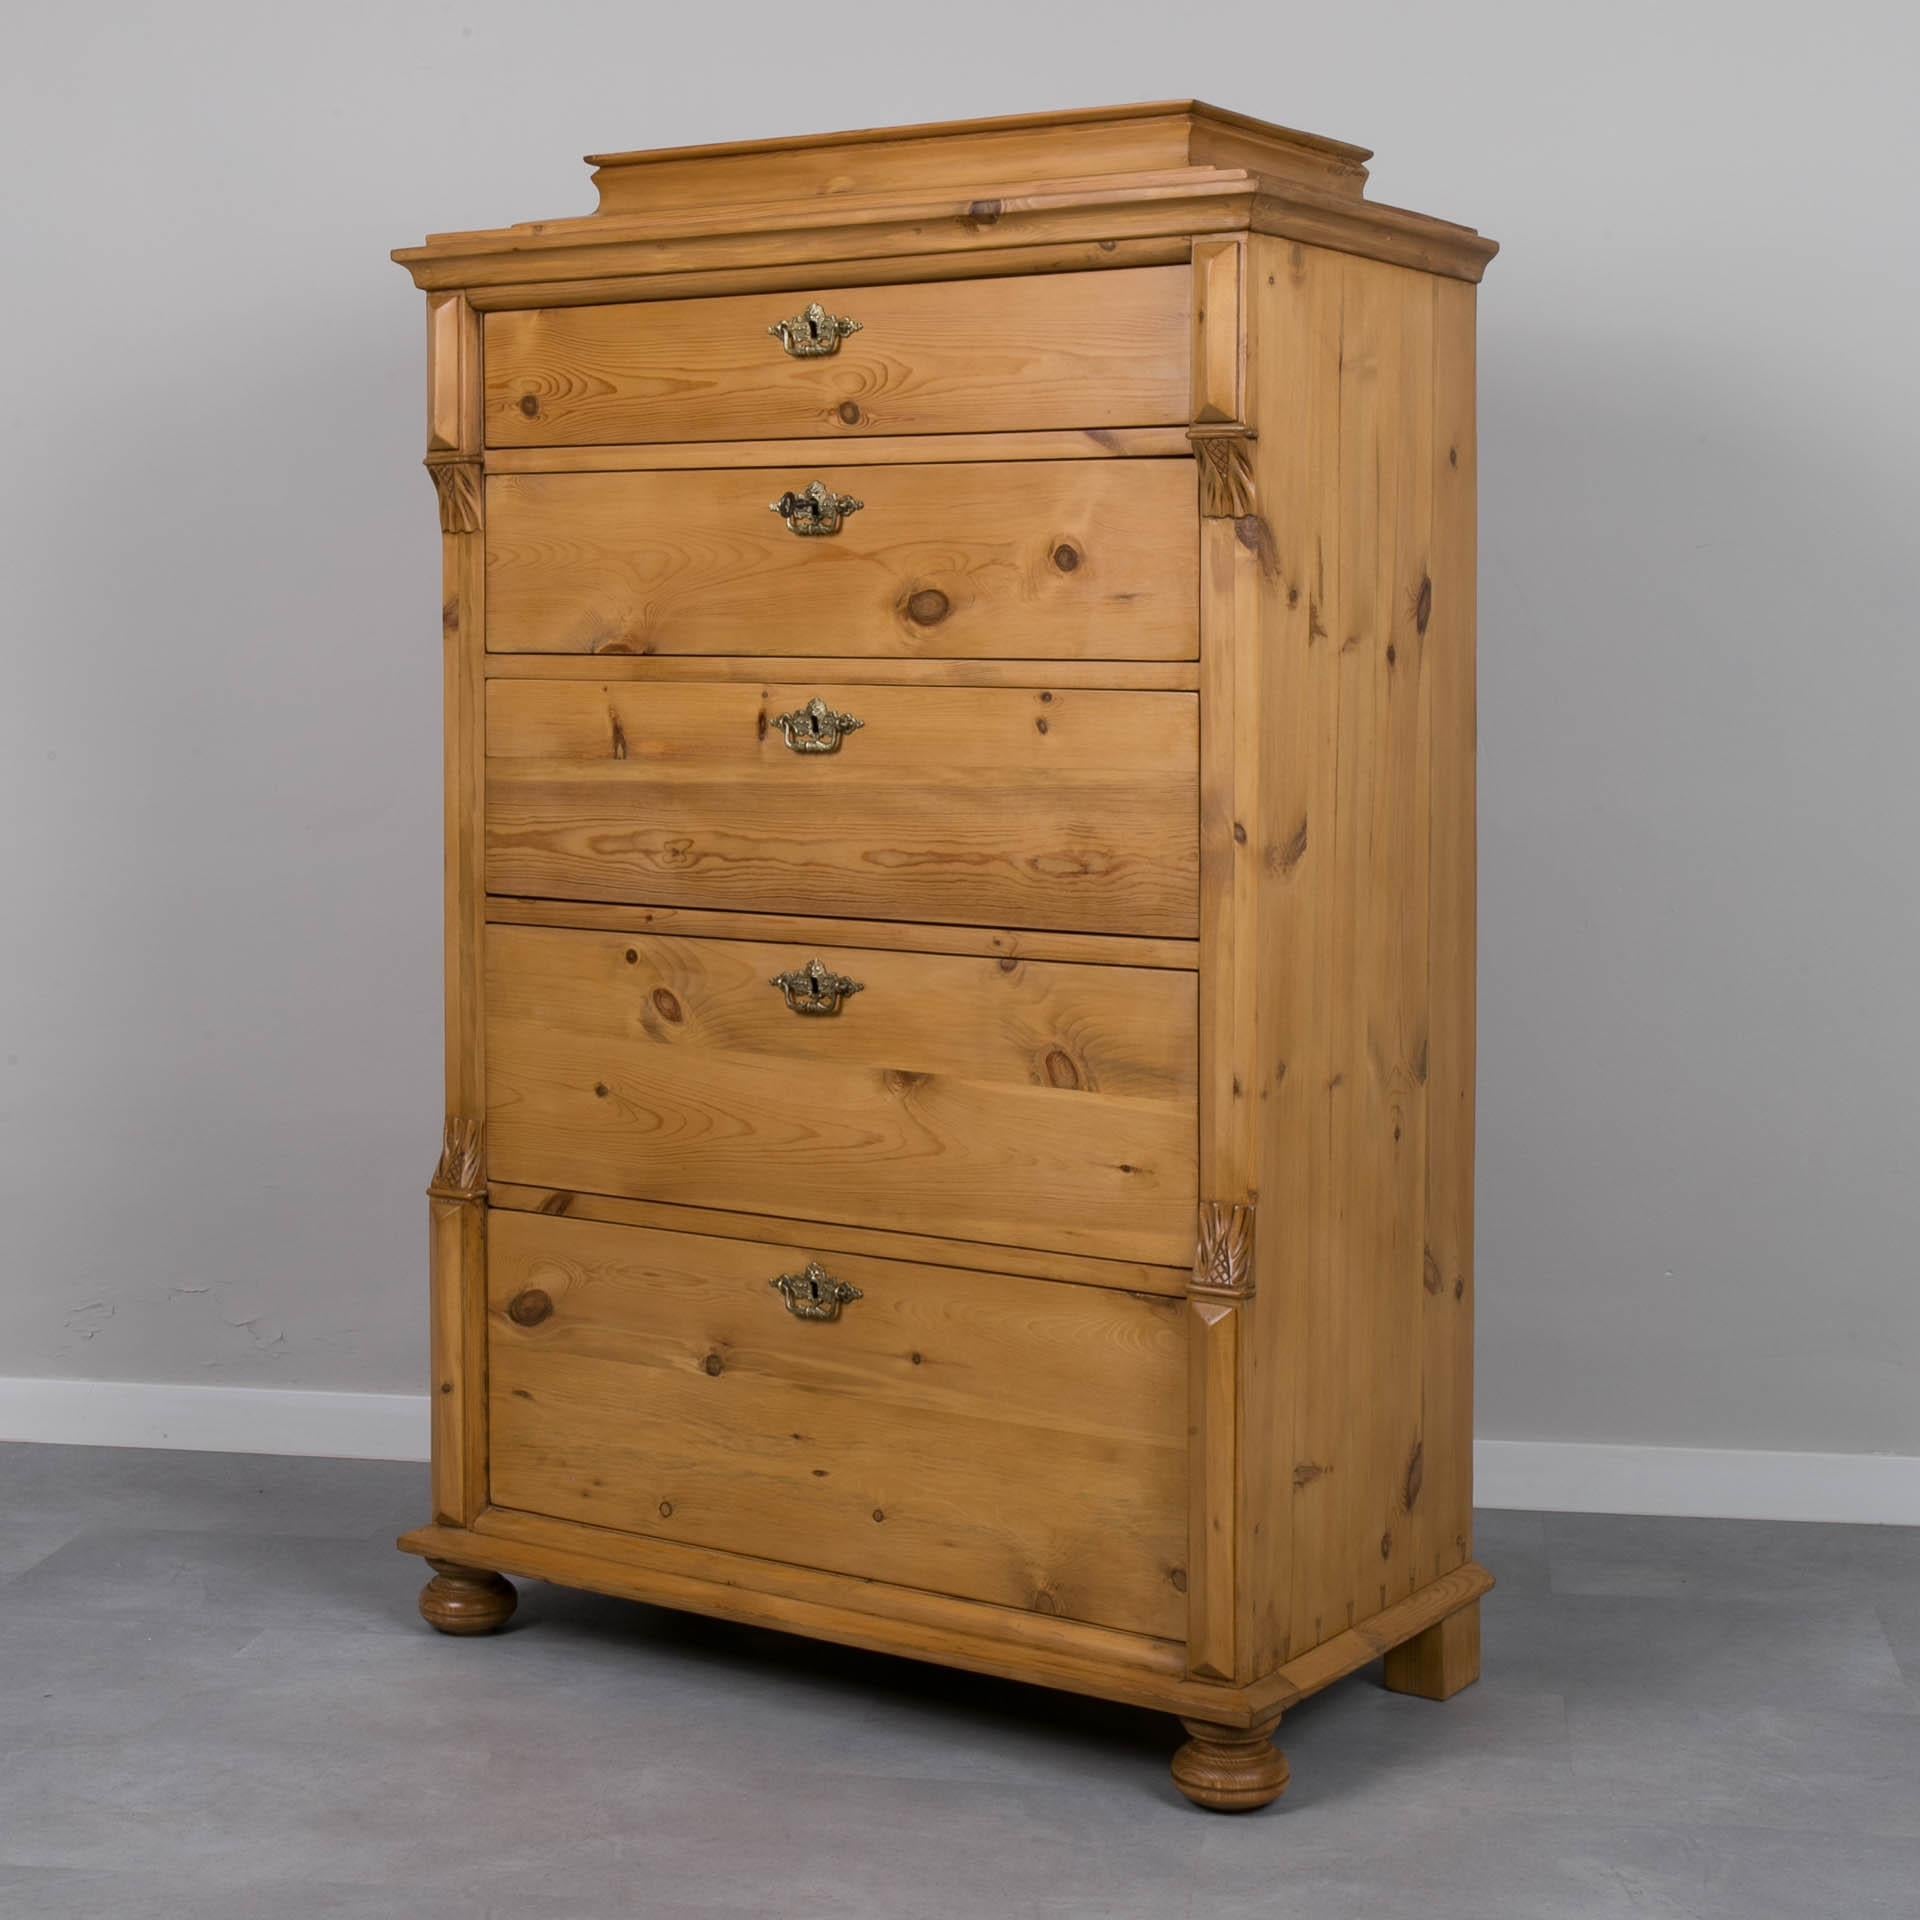 Norwegian Art Nouveau Chest of Drawers, Norway, Early 20th Century